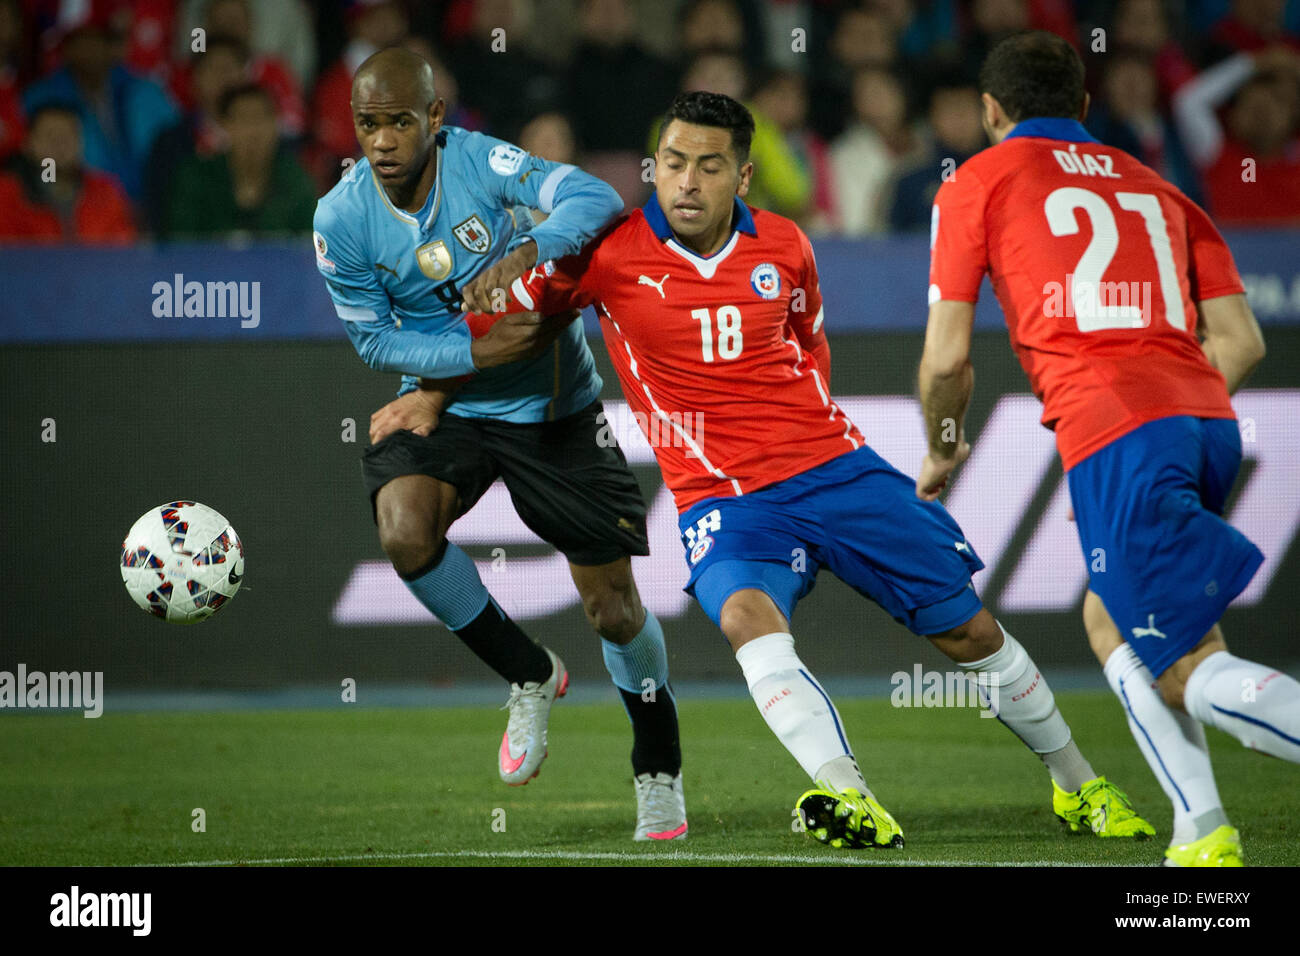 Santiago, Chile. 24th June, 2015. Gonzalo Jara (C) of Chile fights for the ball with Diego Rolan (L) of Uruguay during their quarterfinal at 2015 Copa America in Santiago, Chile, on June 24, 2015. Chile won 1-0. Credit:  Pedro Mera/Xinhua/Alamy Live News Stock Photo